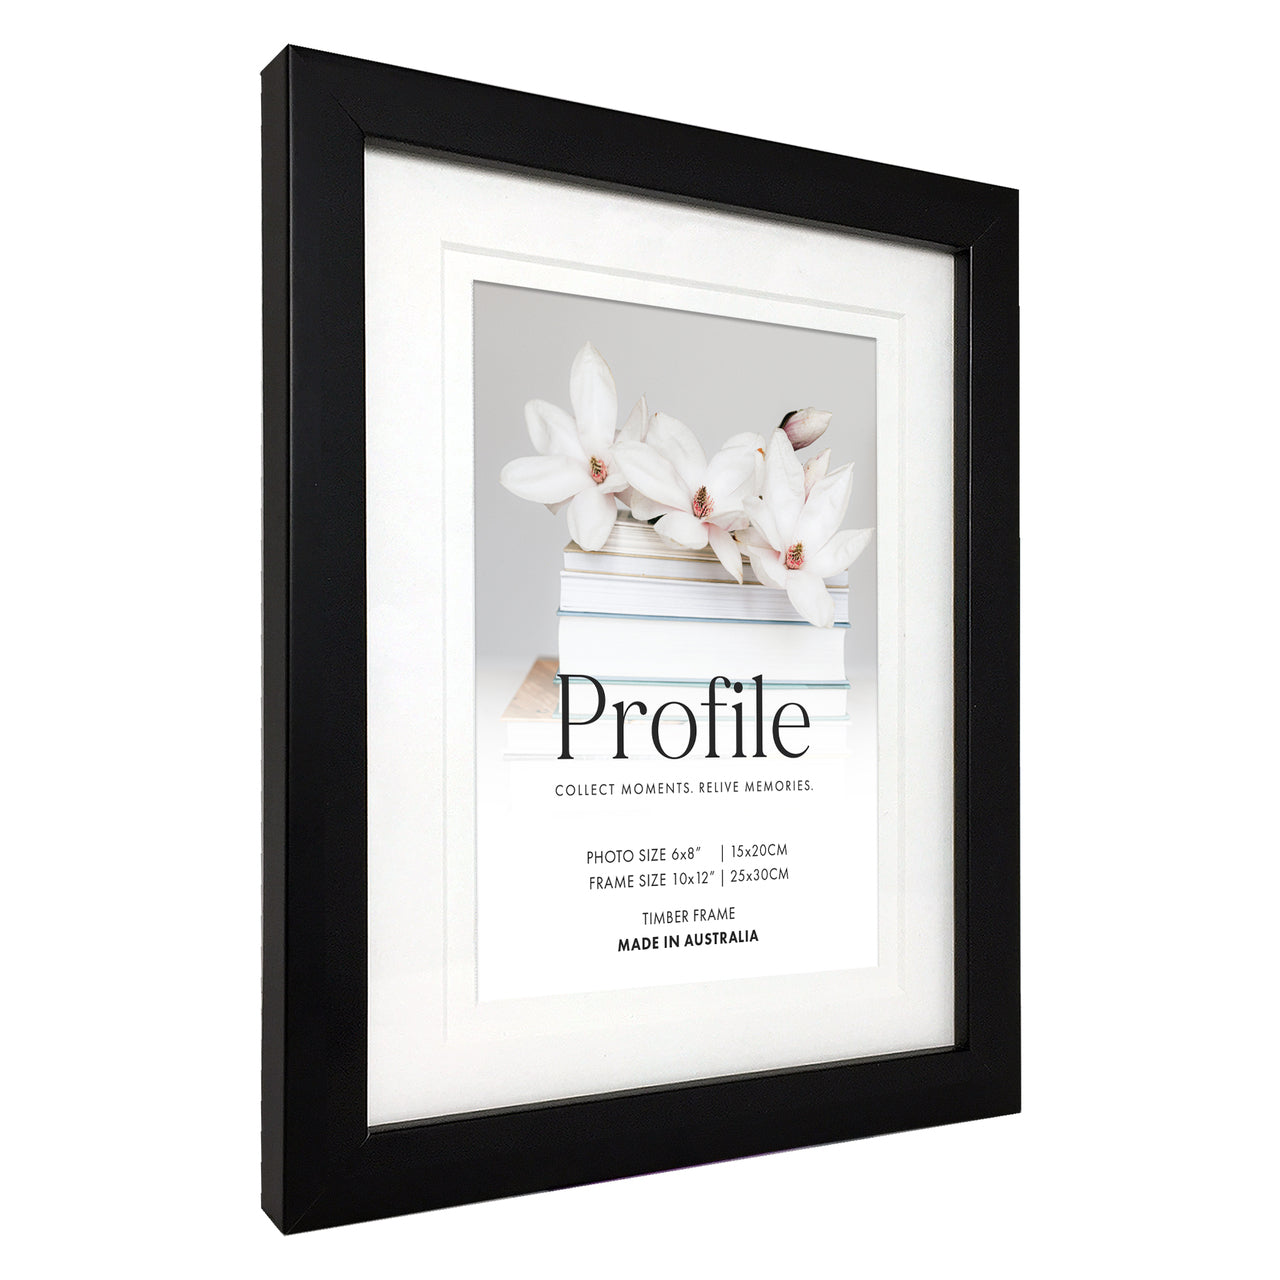 Deluxe Matt Black 11x14 Photo Frame with 8x10 opening